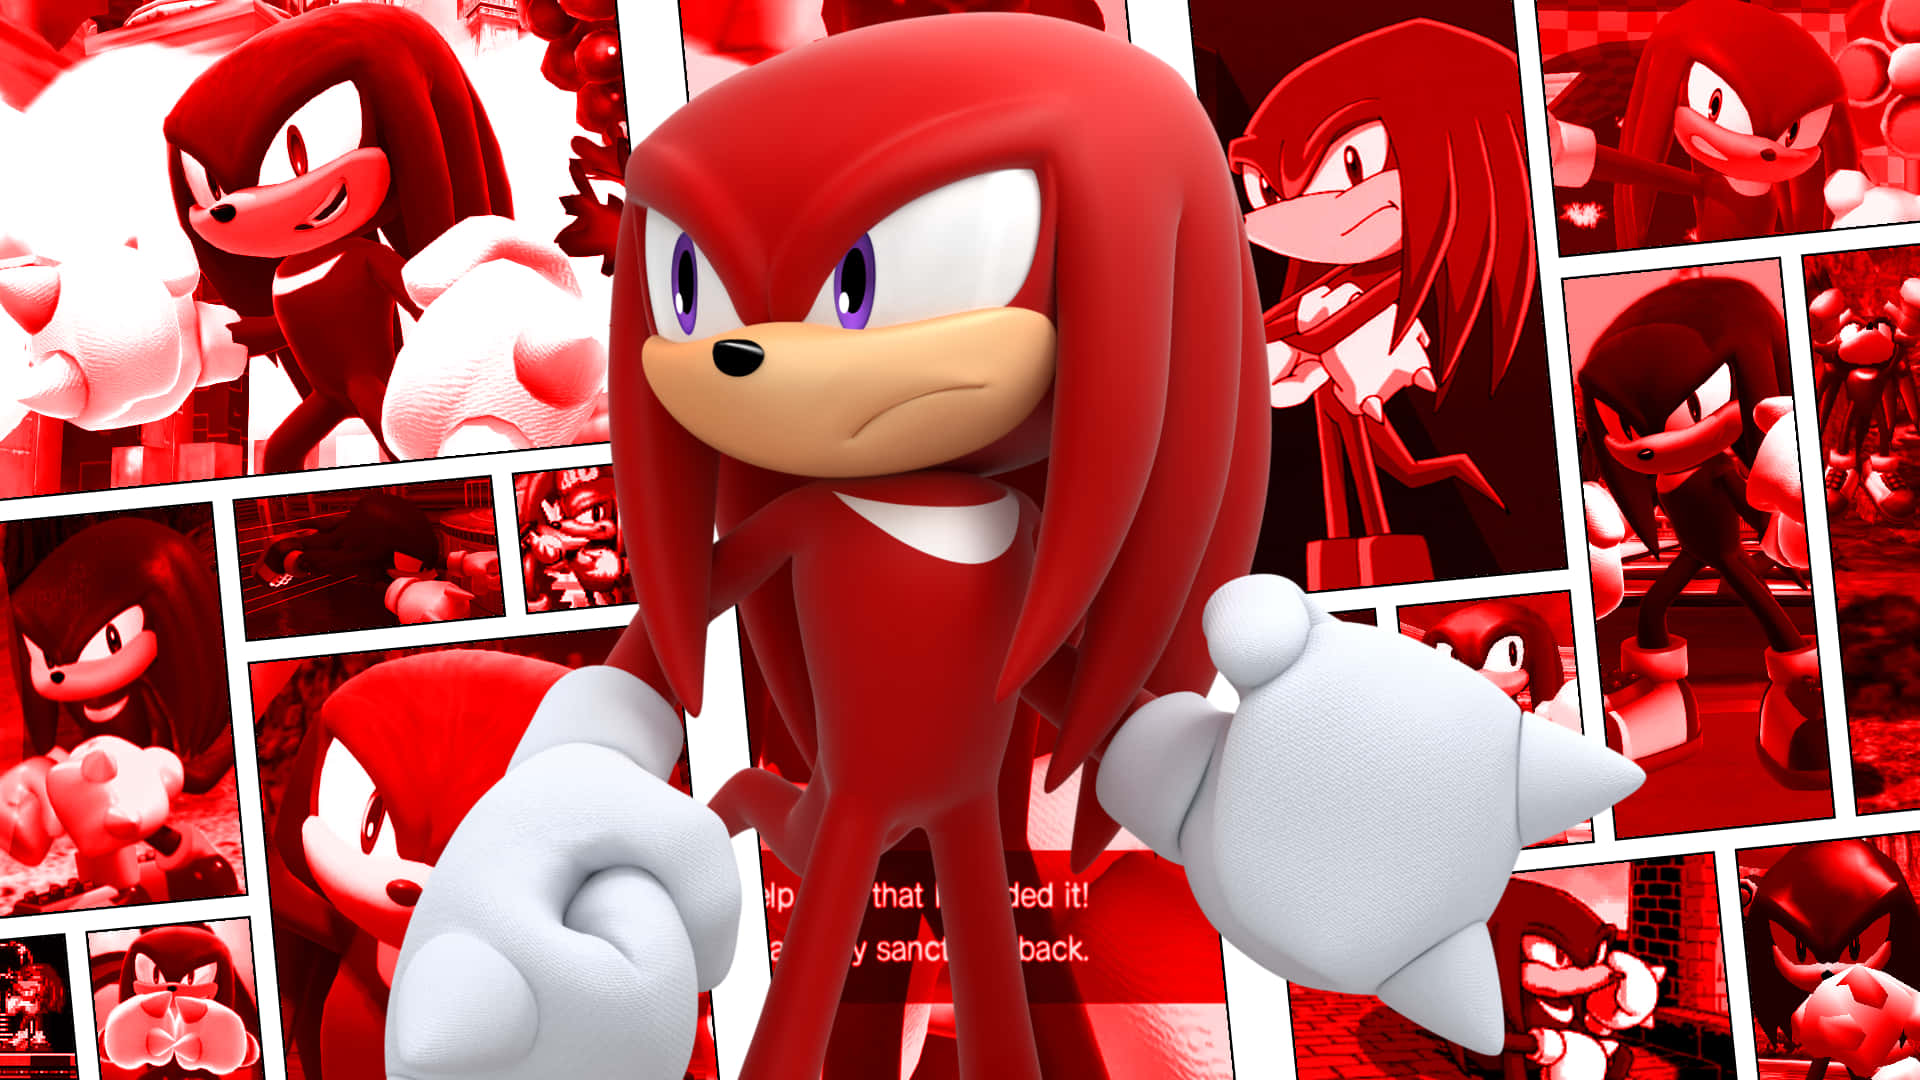 Channel Your Inner Power With Knuckles!